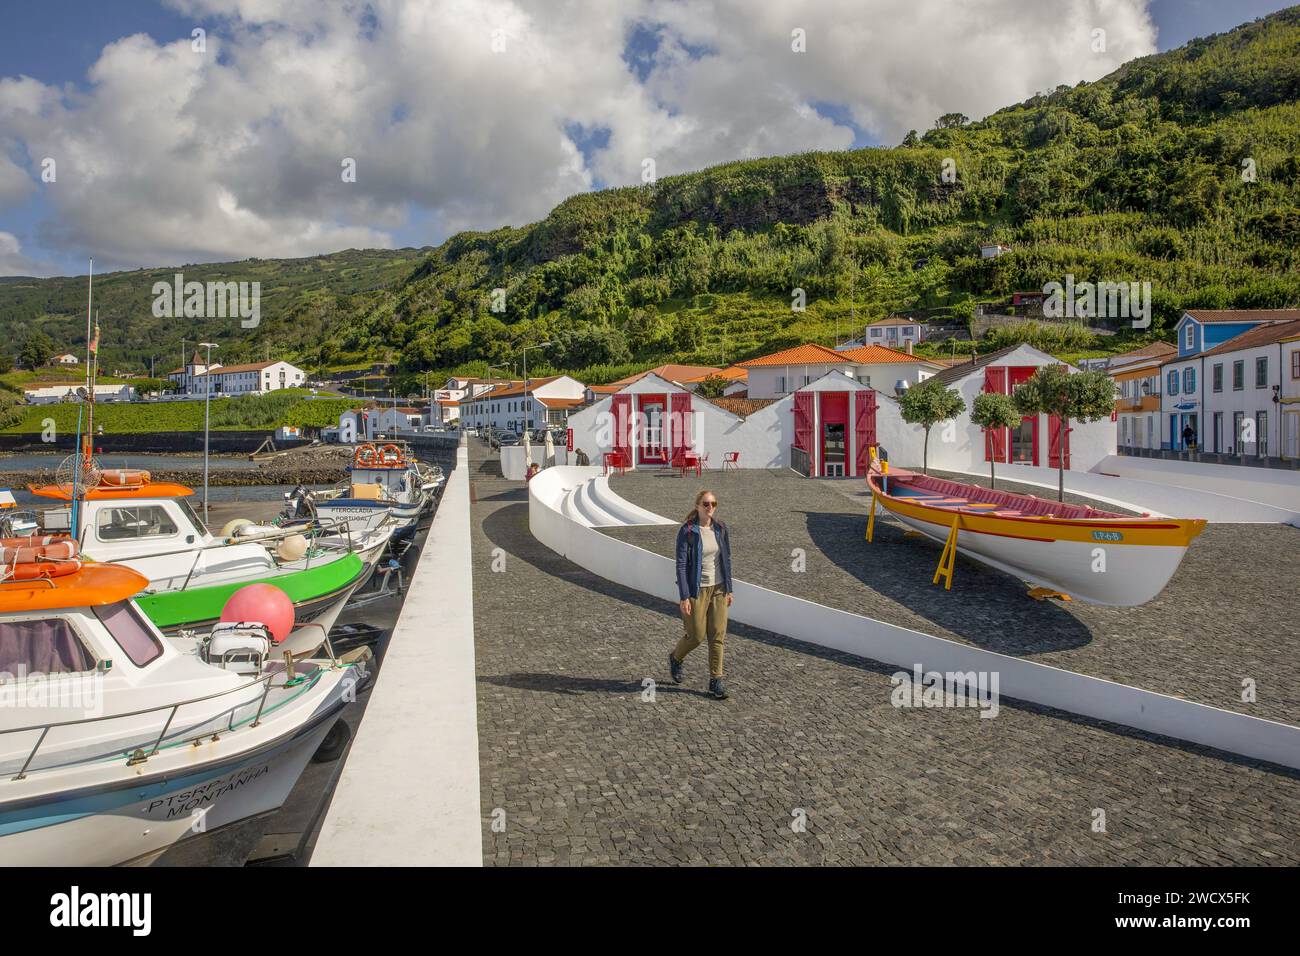 Portugal, Azores archipelago, Pico island, Lajes de Pico, young woman walking in front of an old whaling boat placed in front of white houses and the marina Stock Photo